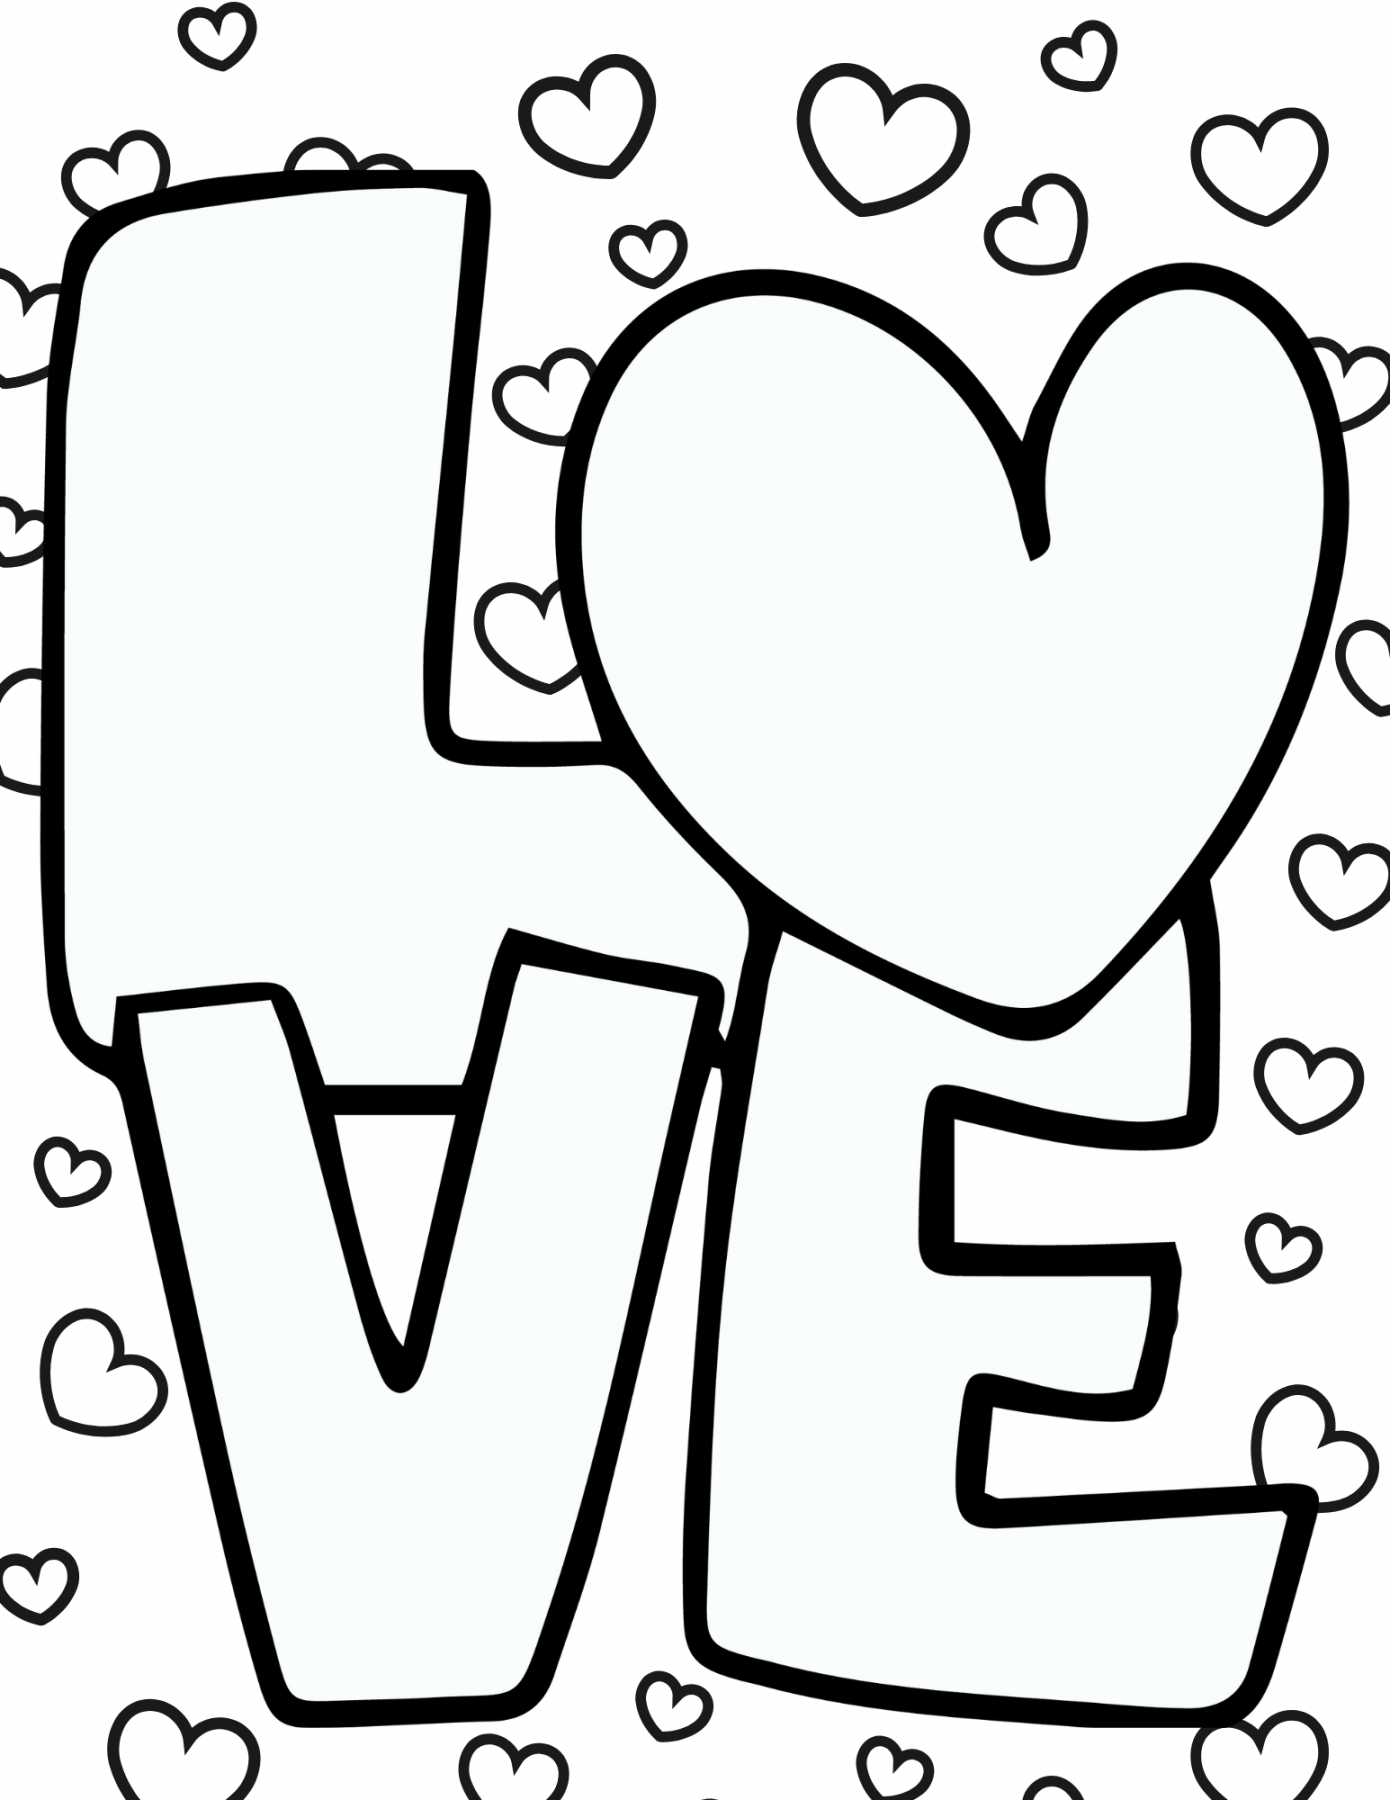 Coloring Pages Printable Free - Printable - Free Printable Love Coloring Pages for Kids and Adults